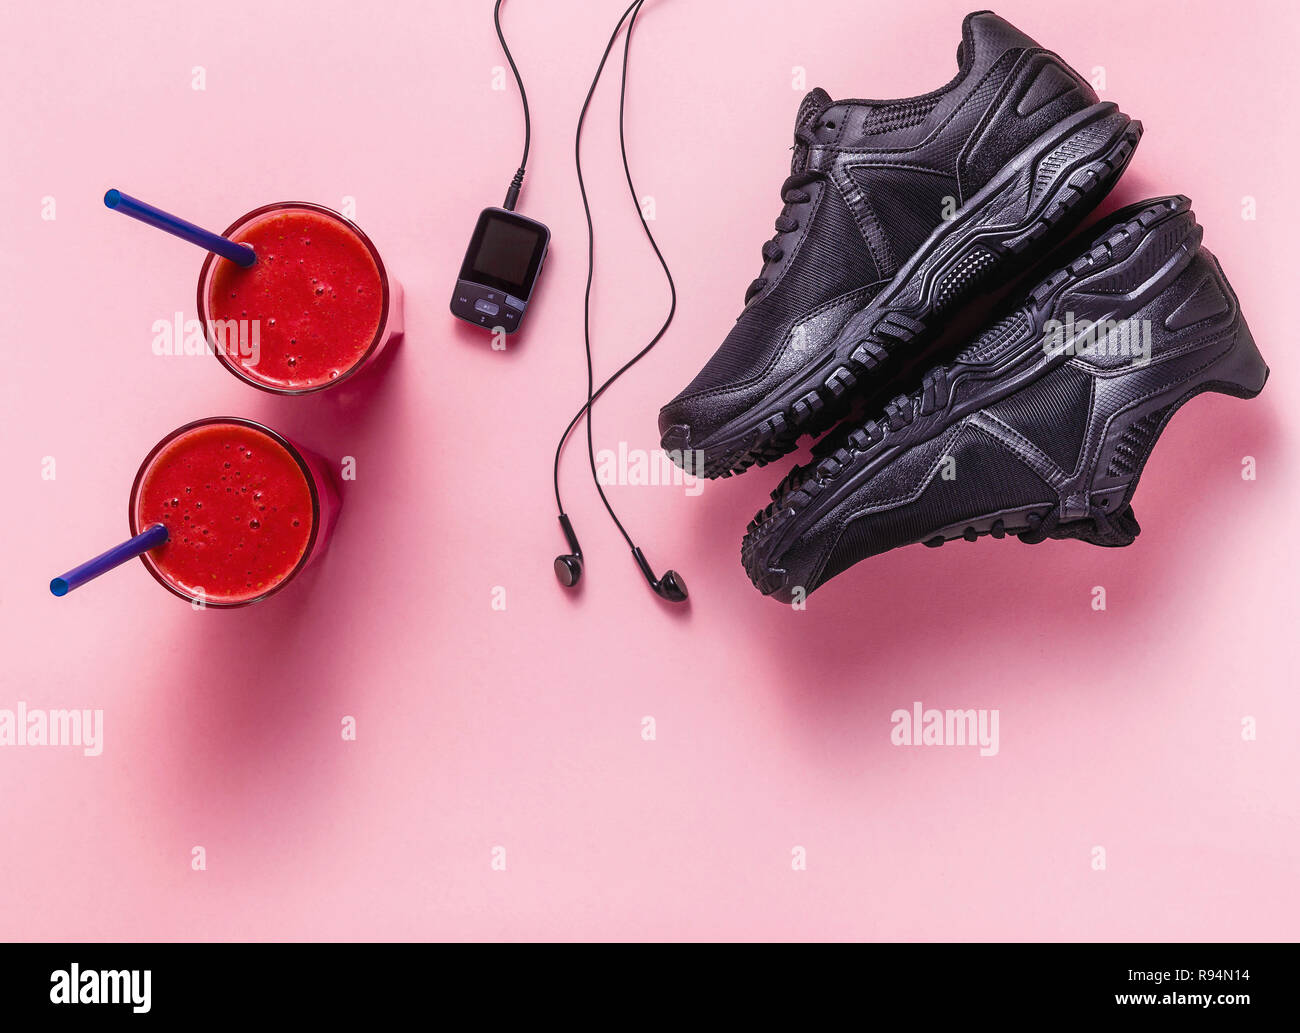 red fresh fruit smoothies, mp3 player with headphones and black sneakers on  a pink background. concept of youth, music, sport and health Stock Photo -  Alamy